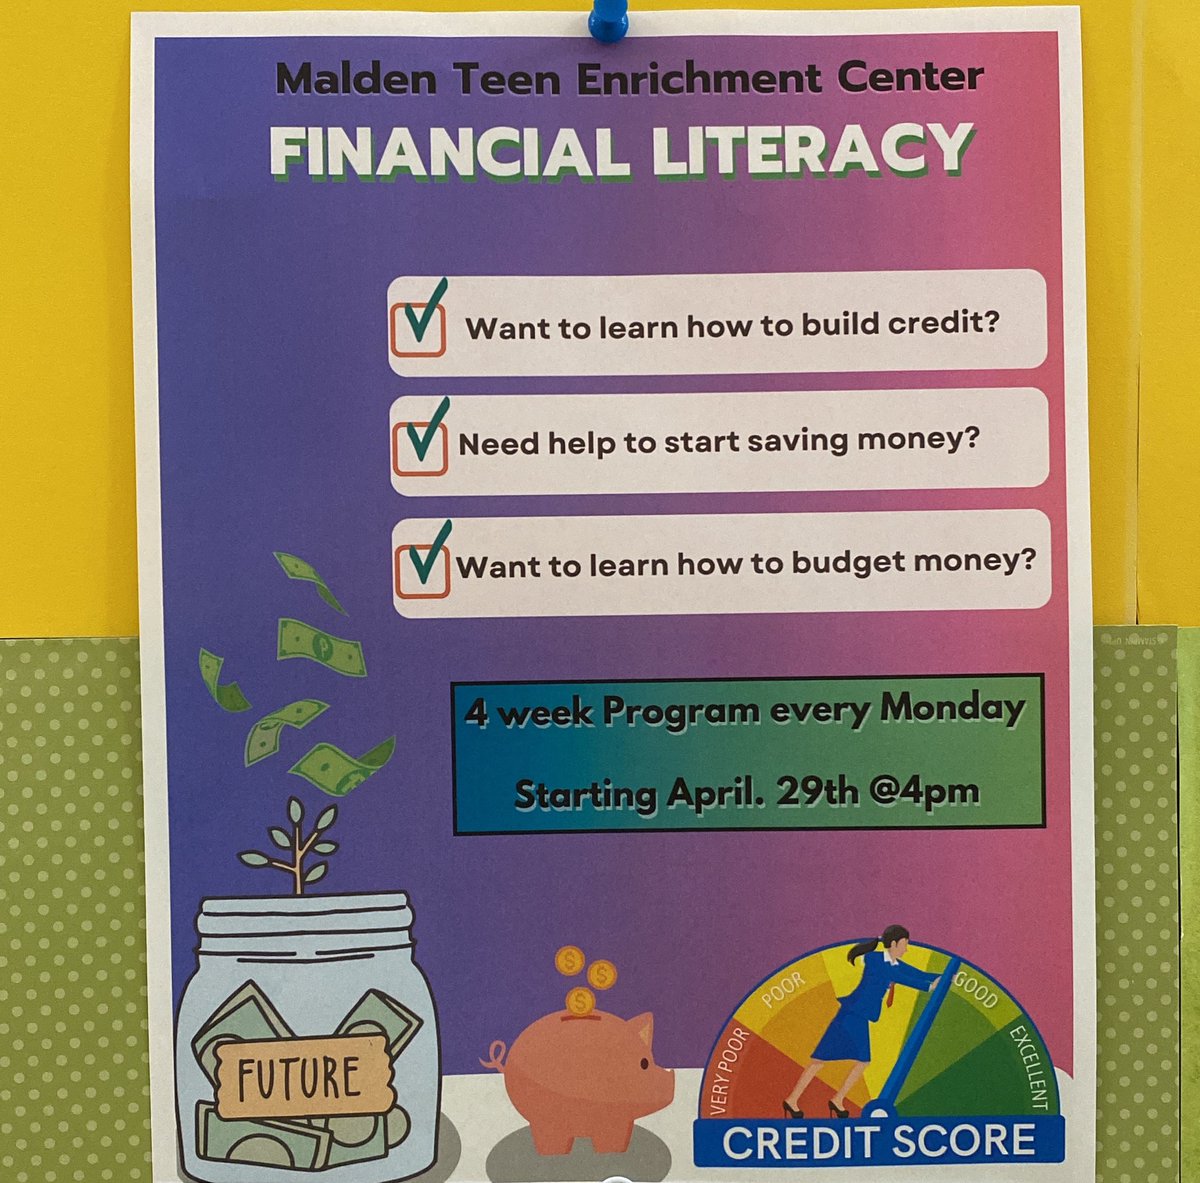 Financial literacy starts today! Learn how to budget your money to start saving. Learn how how to build credit and learn what credit is. #gomalden #mtec #financialliteracy #financialeducation #maldenteenenrichmentcenter